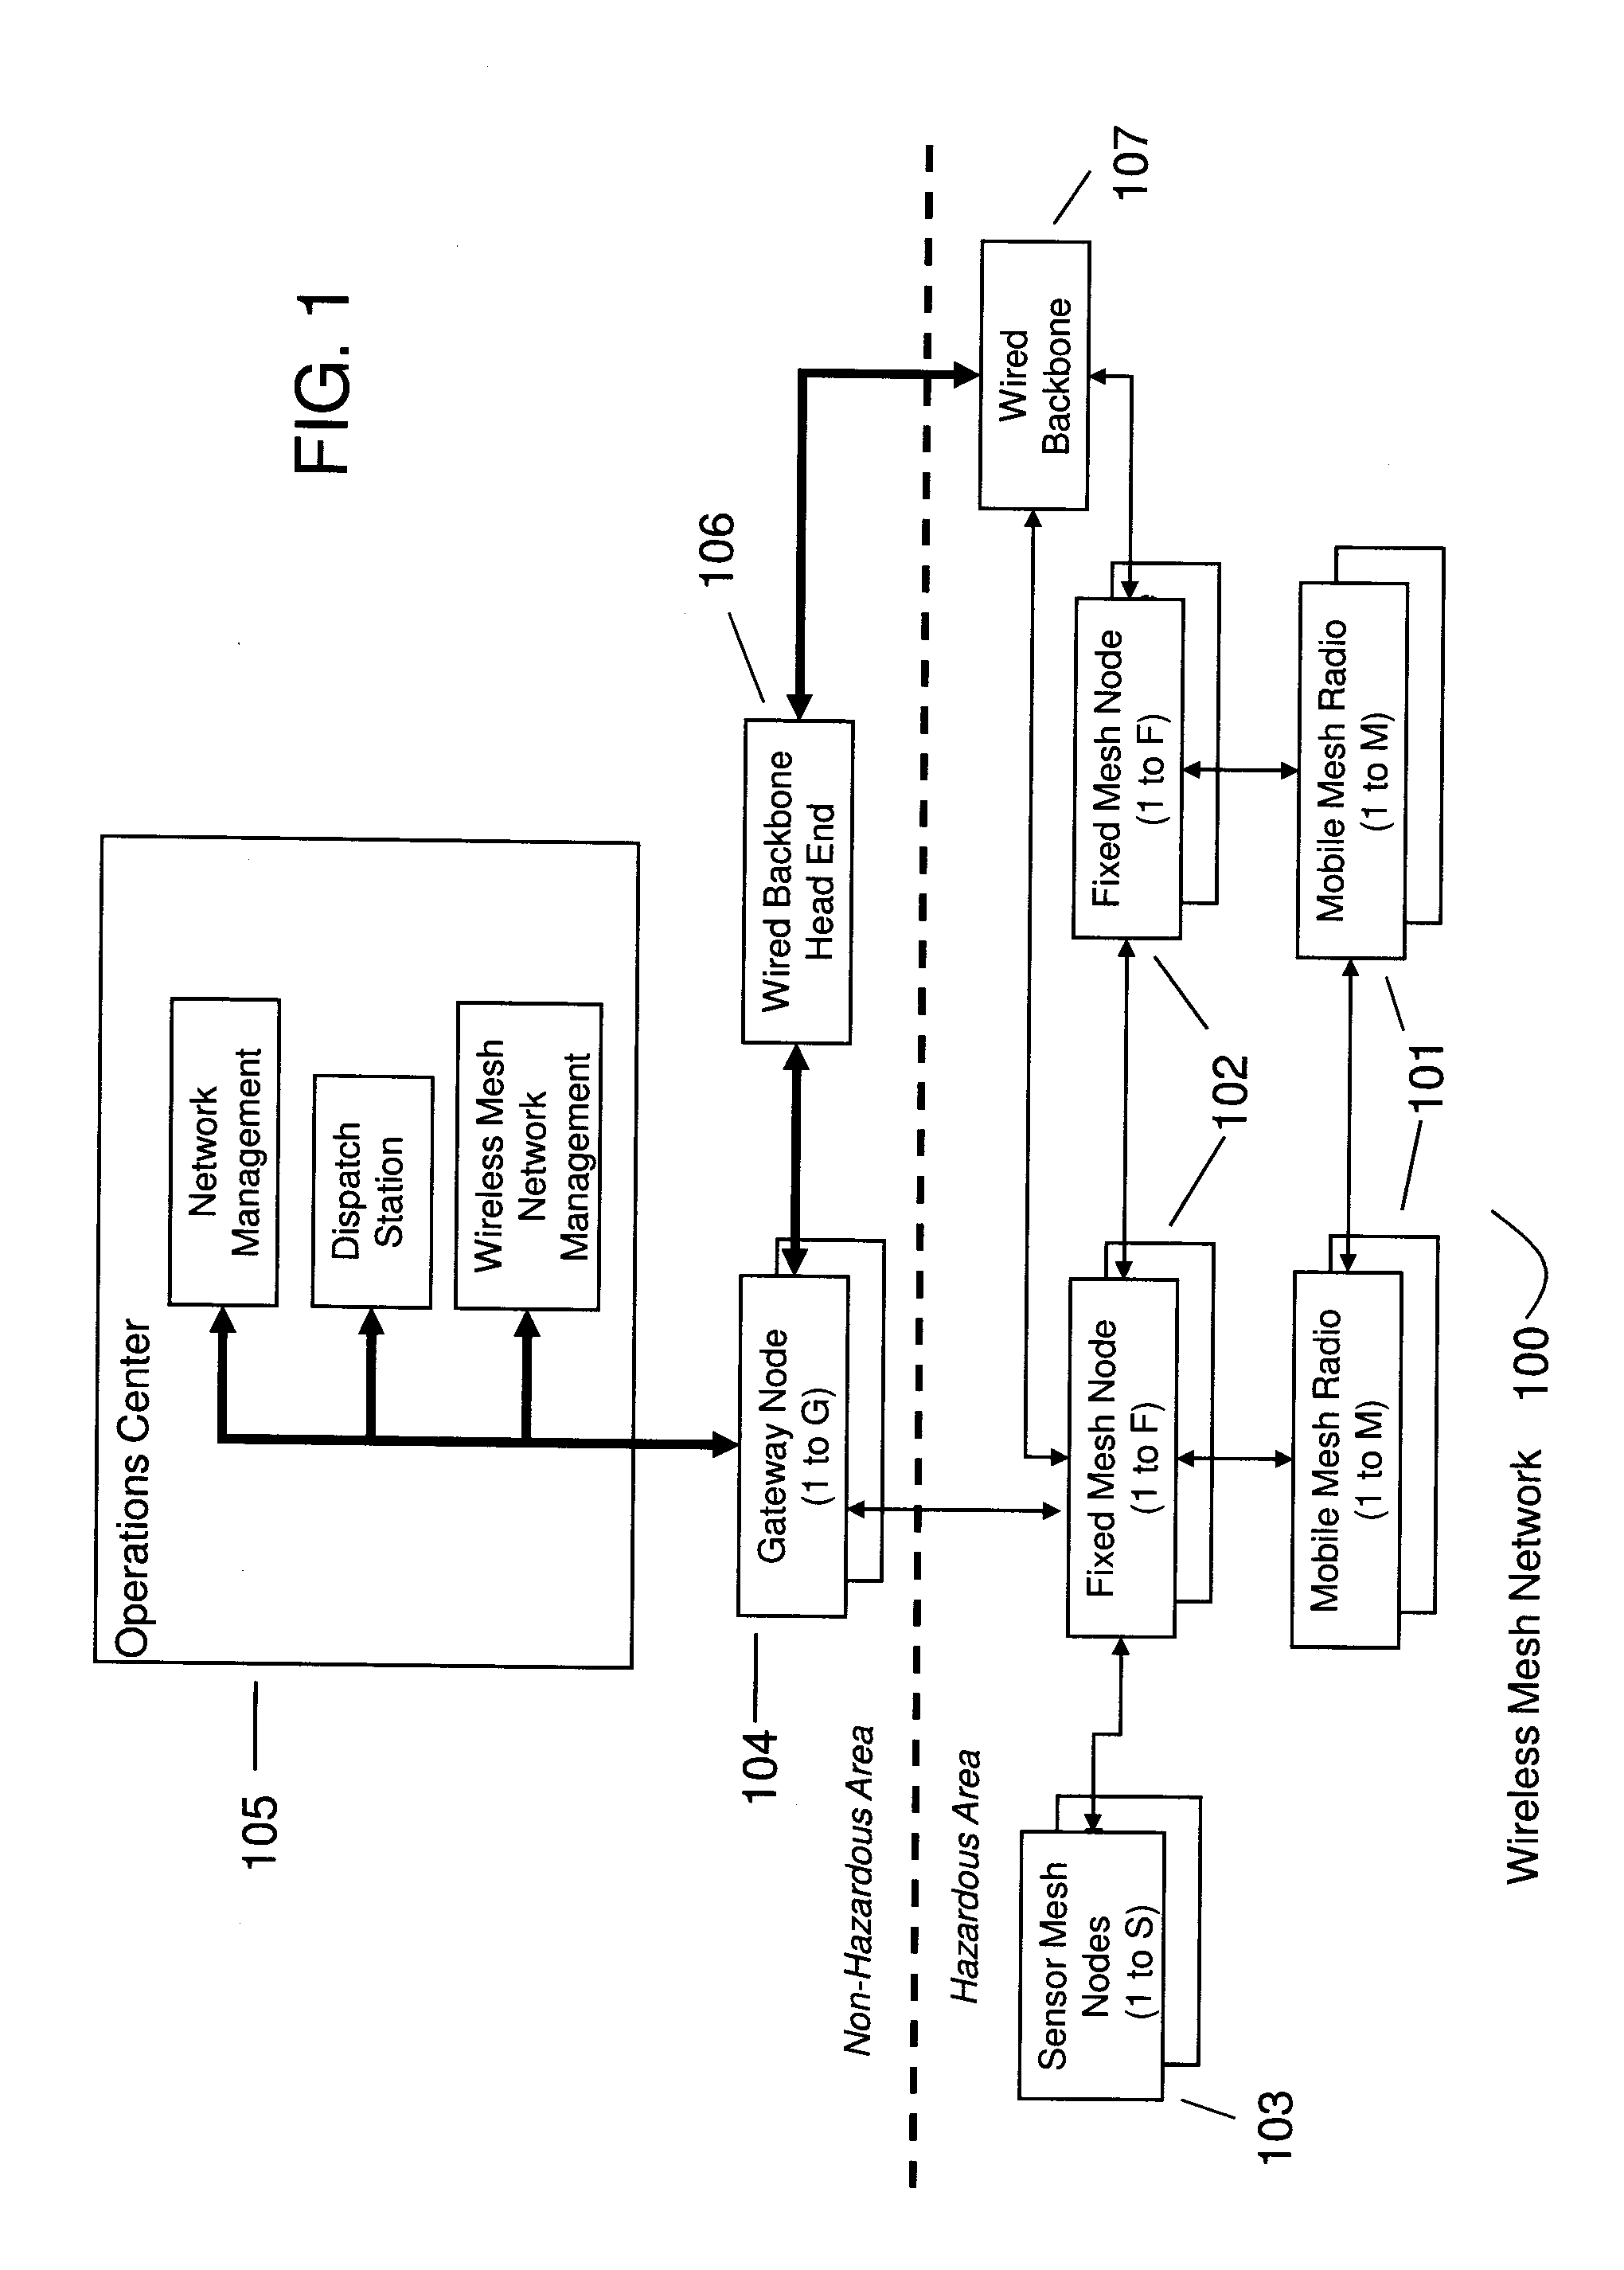 Method and Apparatus for Reliable Communications in Underground and Hazardous Areas